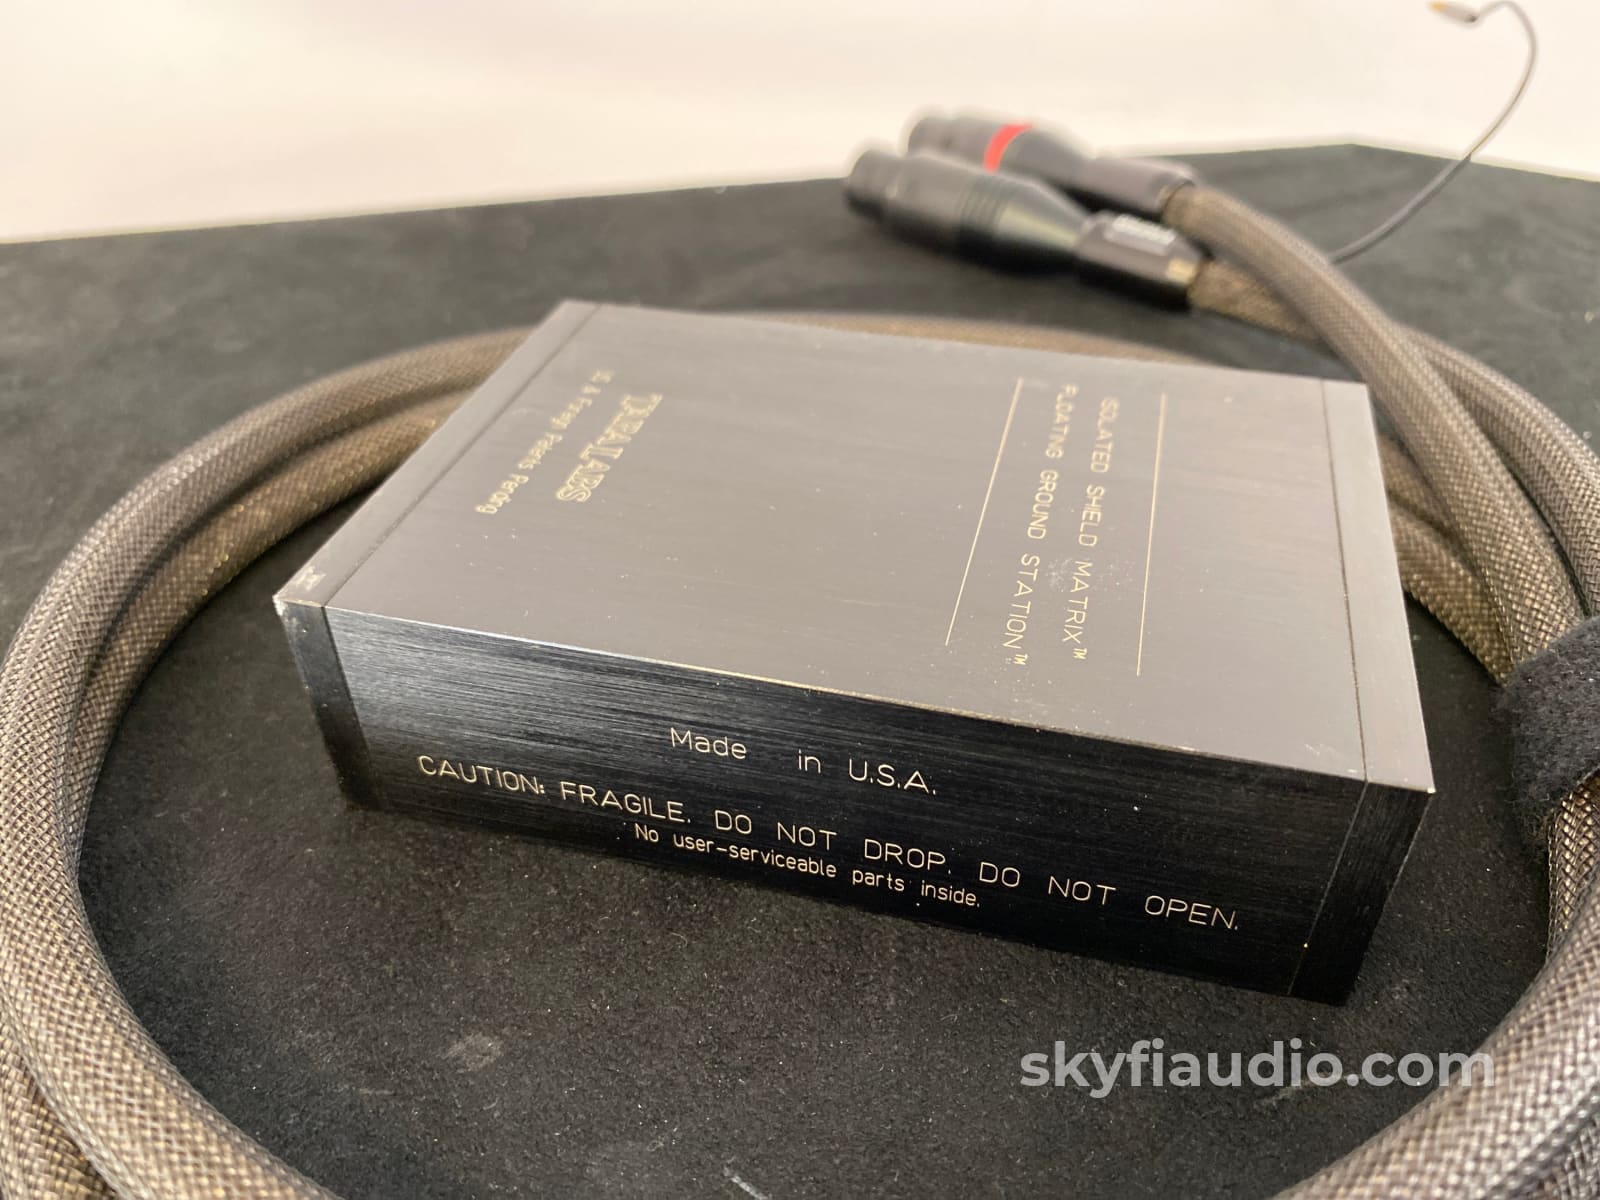 Tara Labs The One Xlr Interconnect With Isolated Matrix Ground Station - 1M Cables